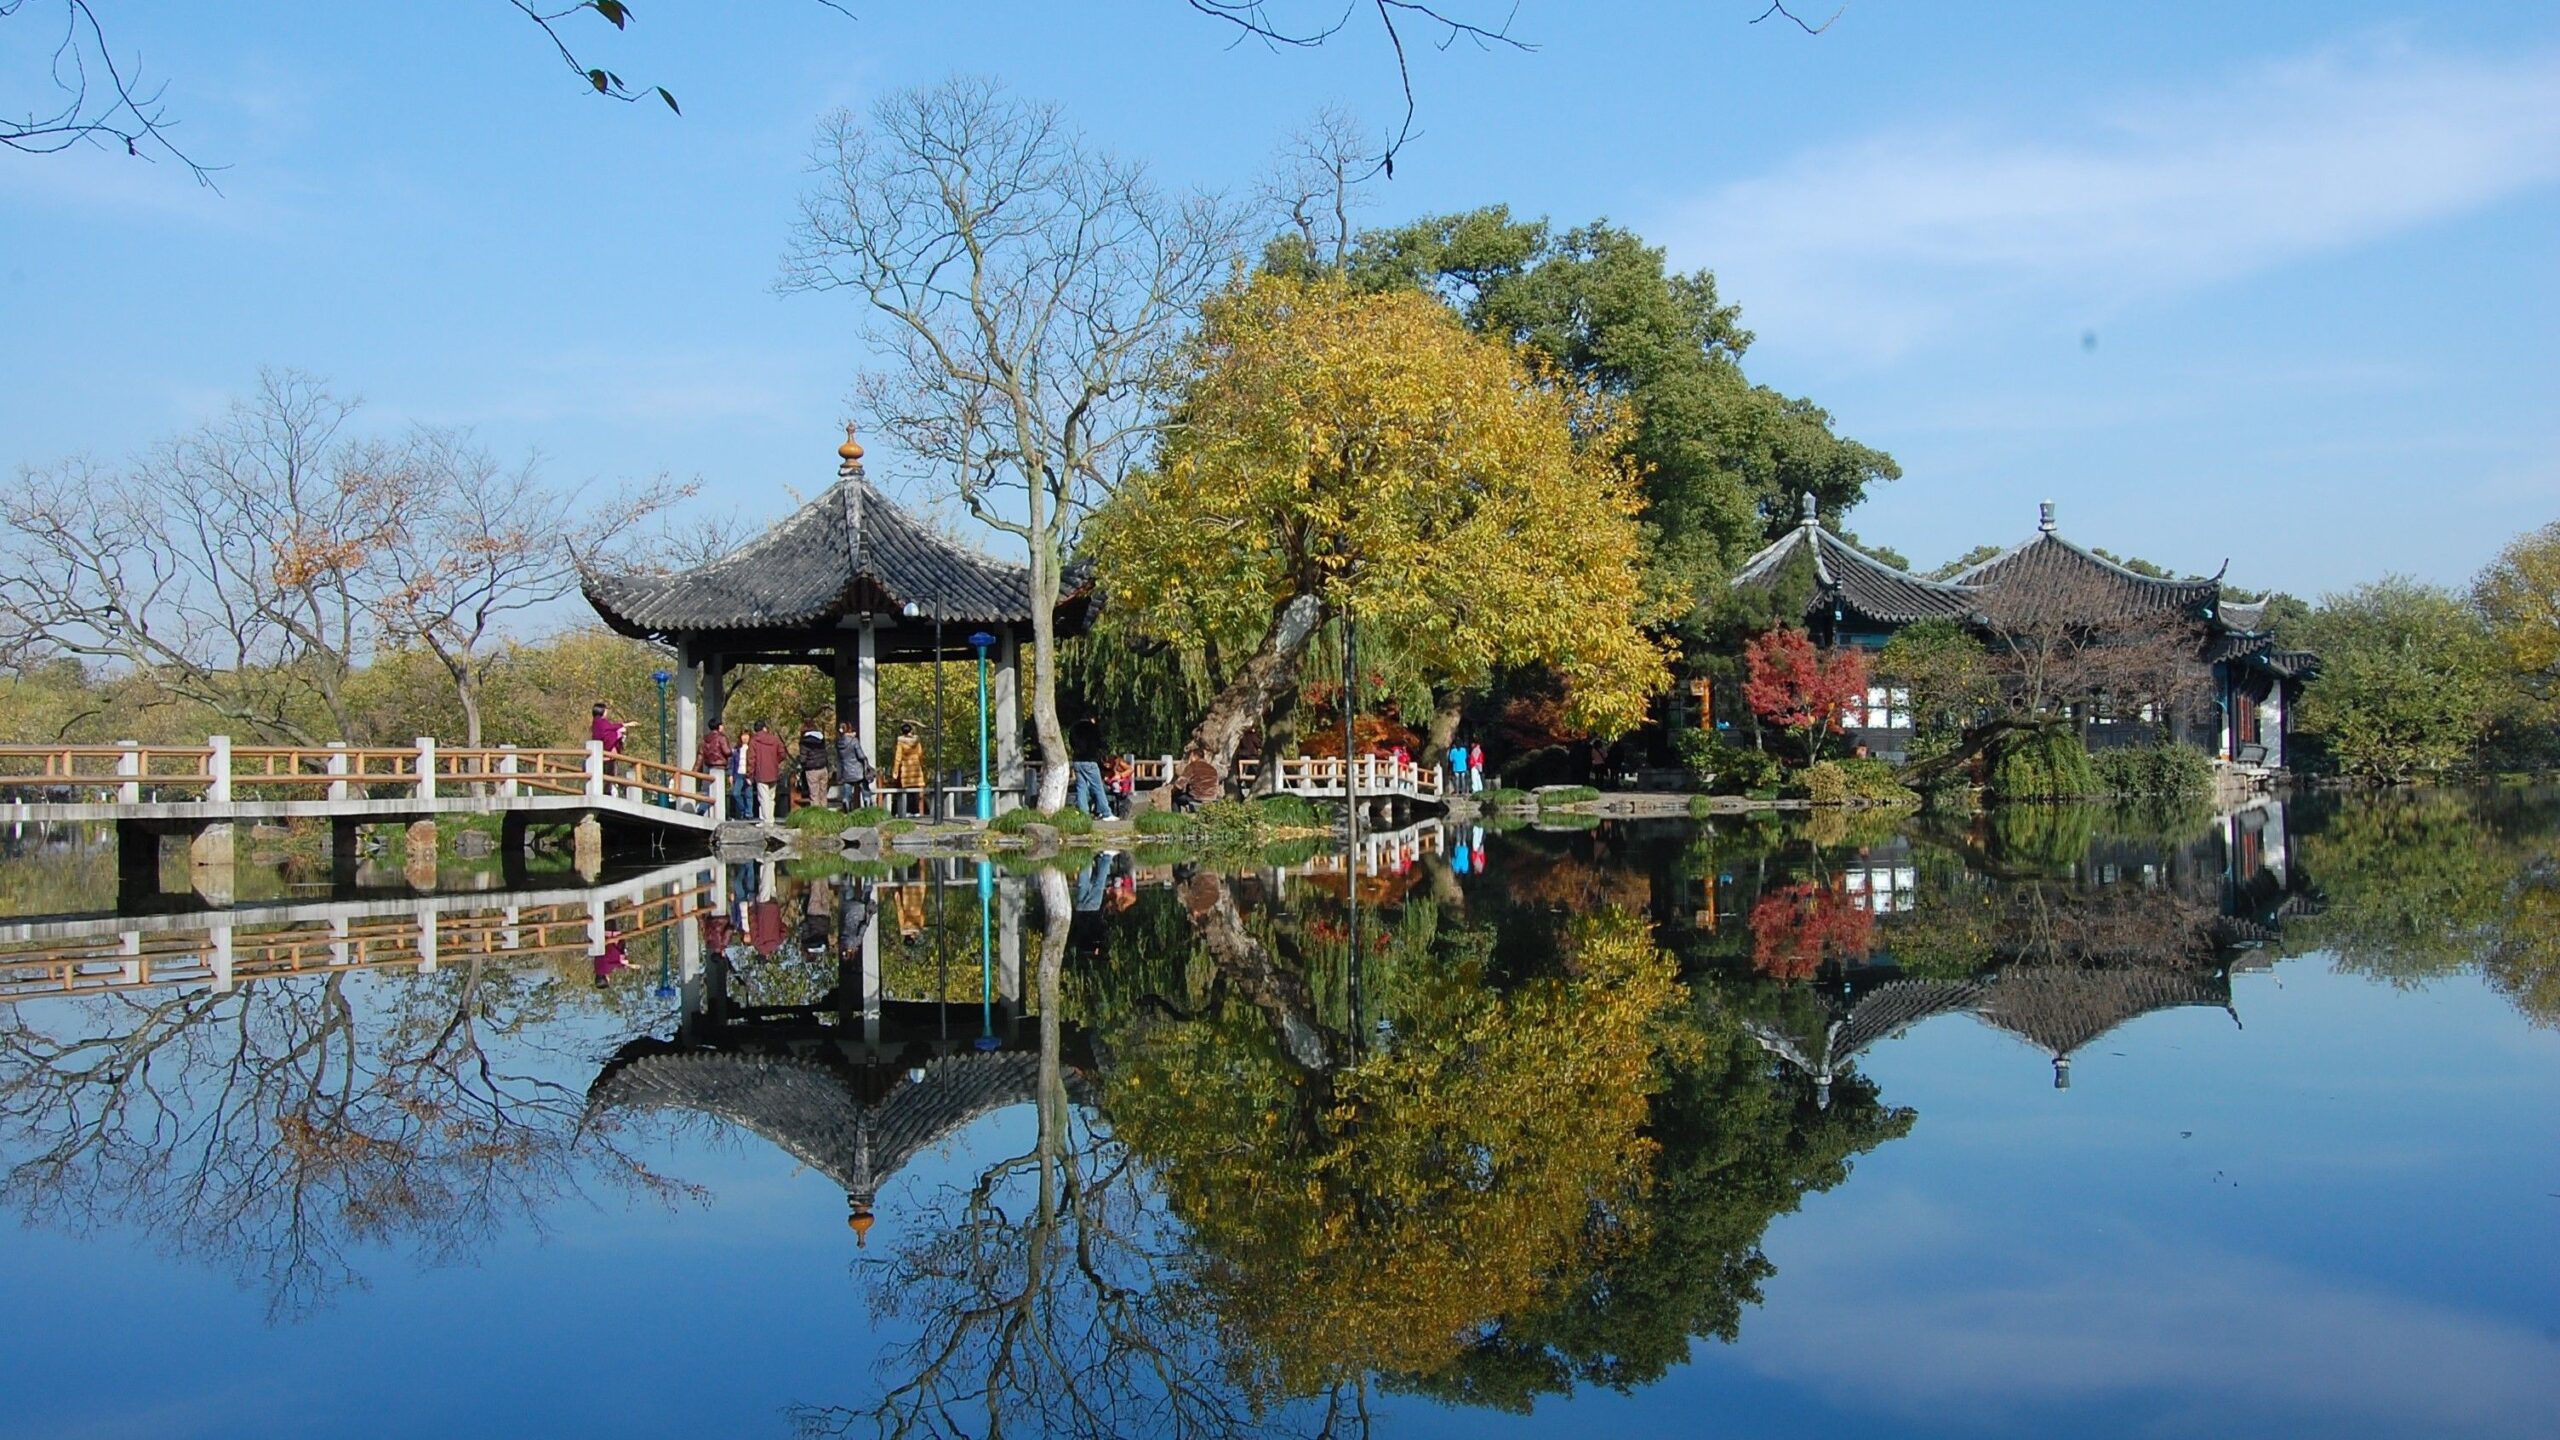 West Lake: A Serene Oasis in the Heart of Hangzhou